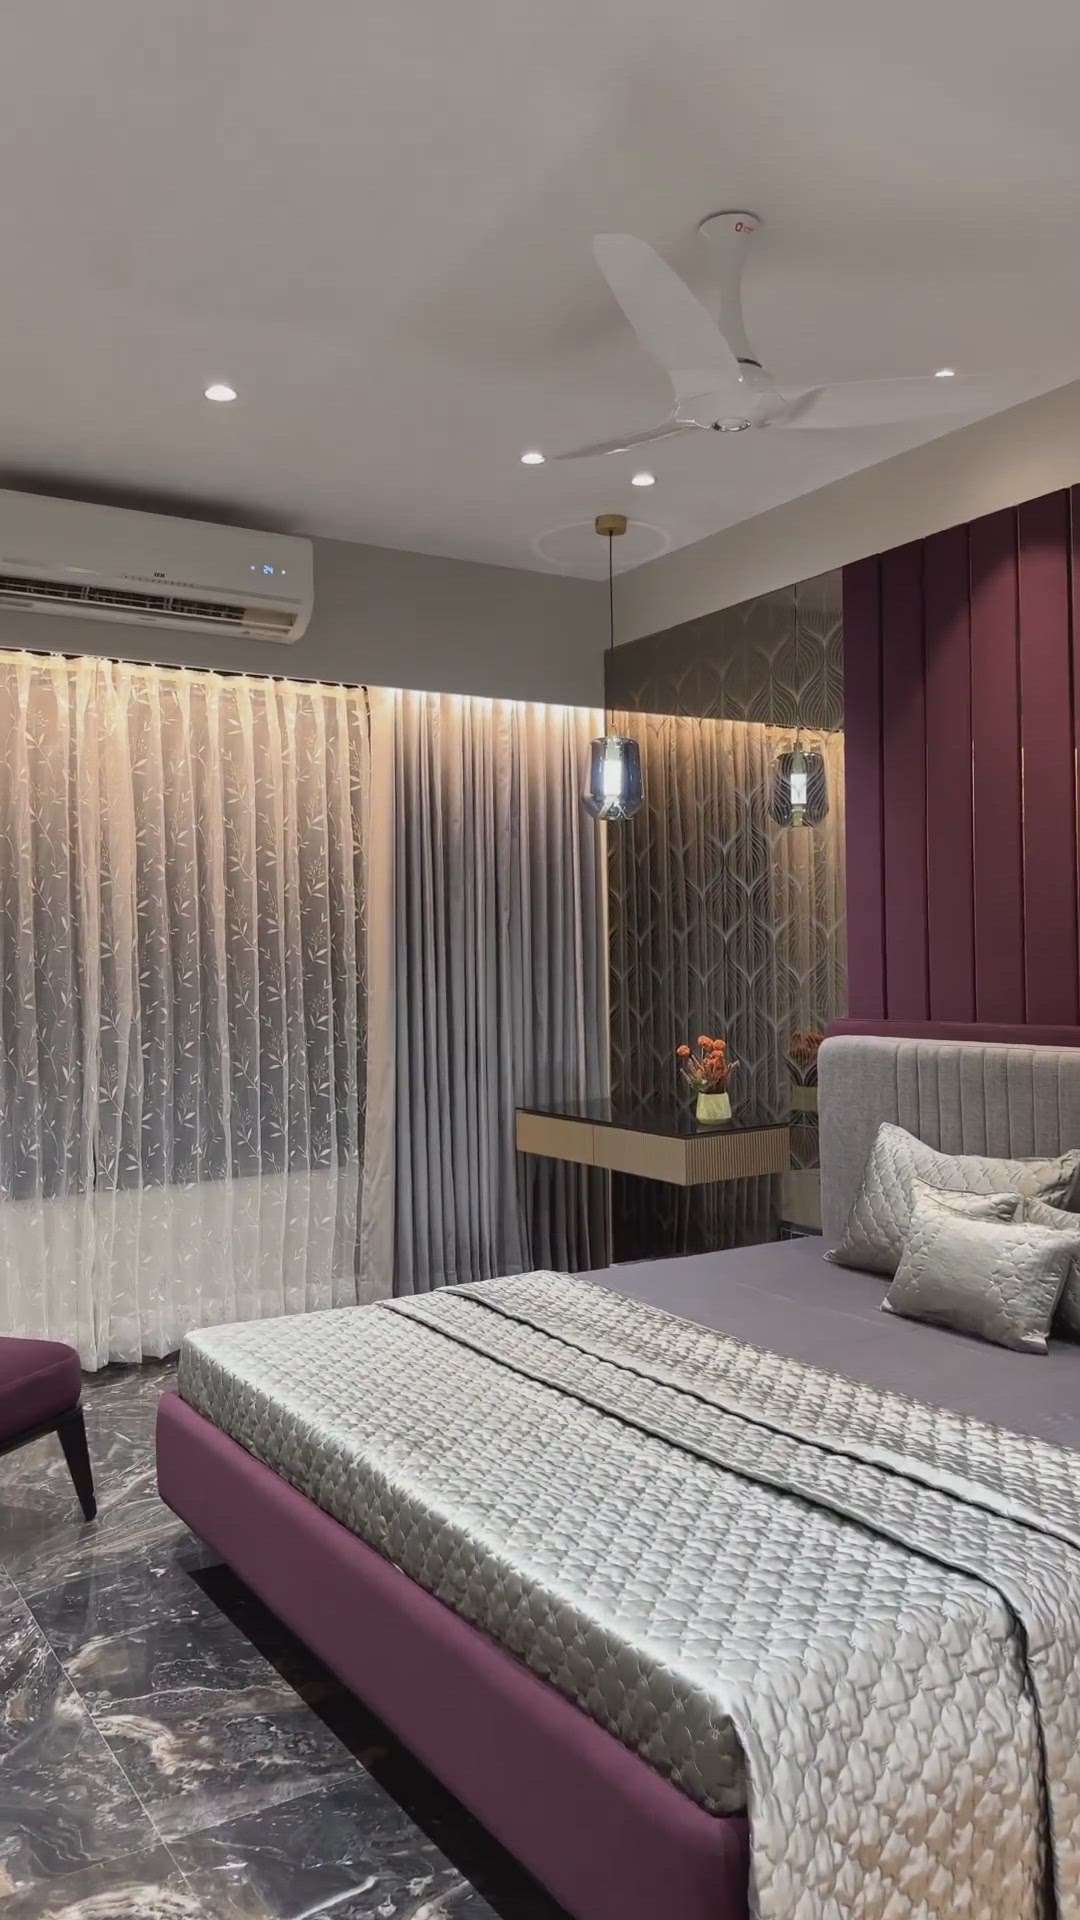 Bedroom Interior 
Ace Solution Helps To Provide You To Make Better Interior Designs
-We Provide Pan India Services
-We Design | Home | Offices | Cafe |
-Comment Down Which One Is your Favourite.
-Like, Share With Your Friends.
-Dm For Reasonable Rates.
-For Construction And Home Designs.
-We Do Vastu Work Also.
.
.
#BedroomDecor #InteriorDesigner #bedroominteriors #budget